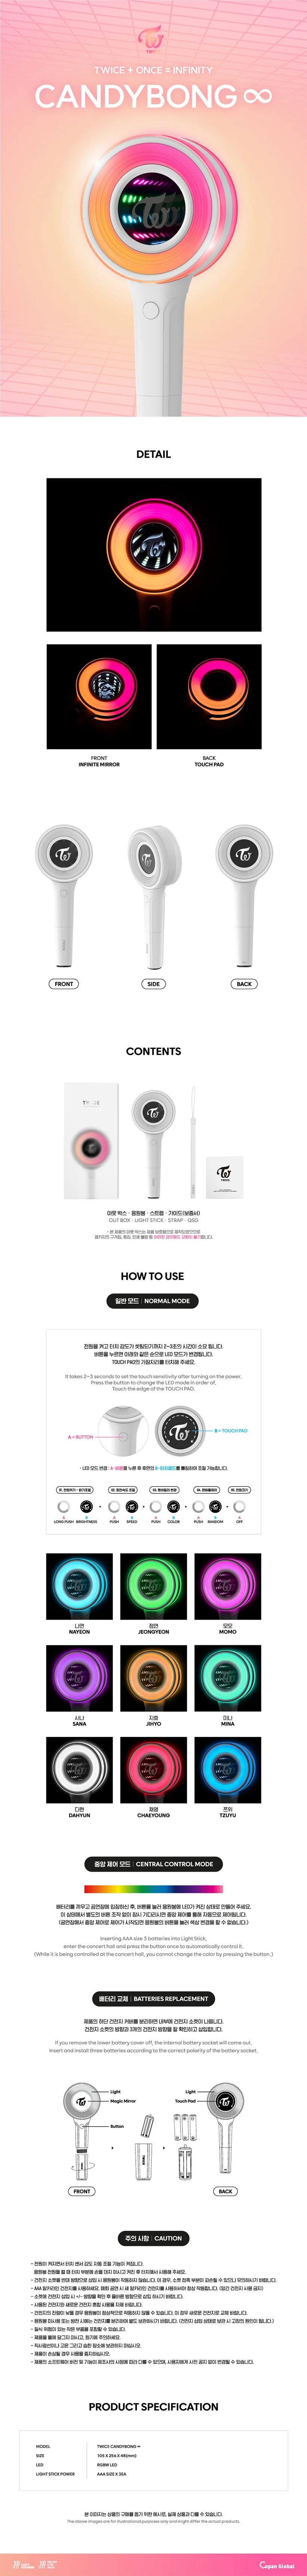 TWICE CANDYBONG INFINITY 3RD VERSION Infographic